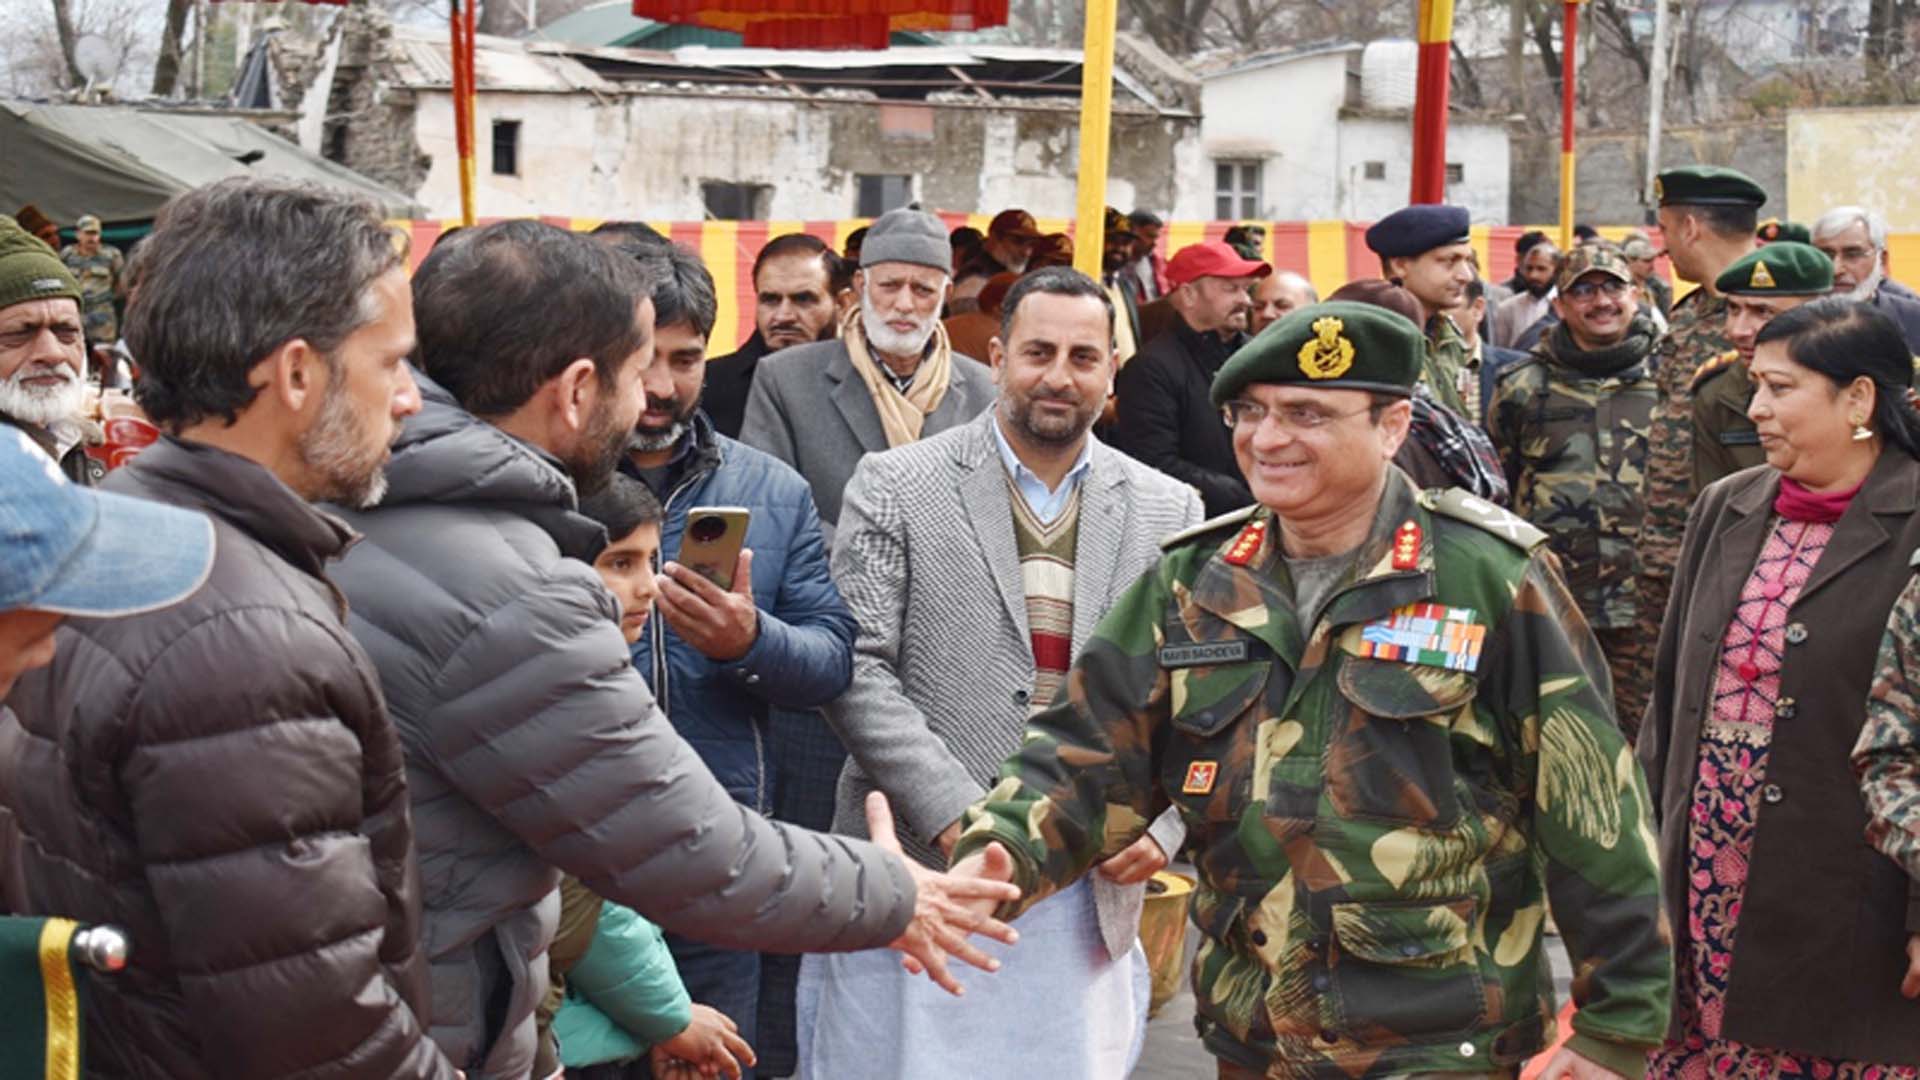 Army committed to community engagement: GOC